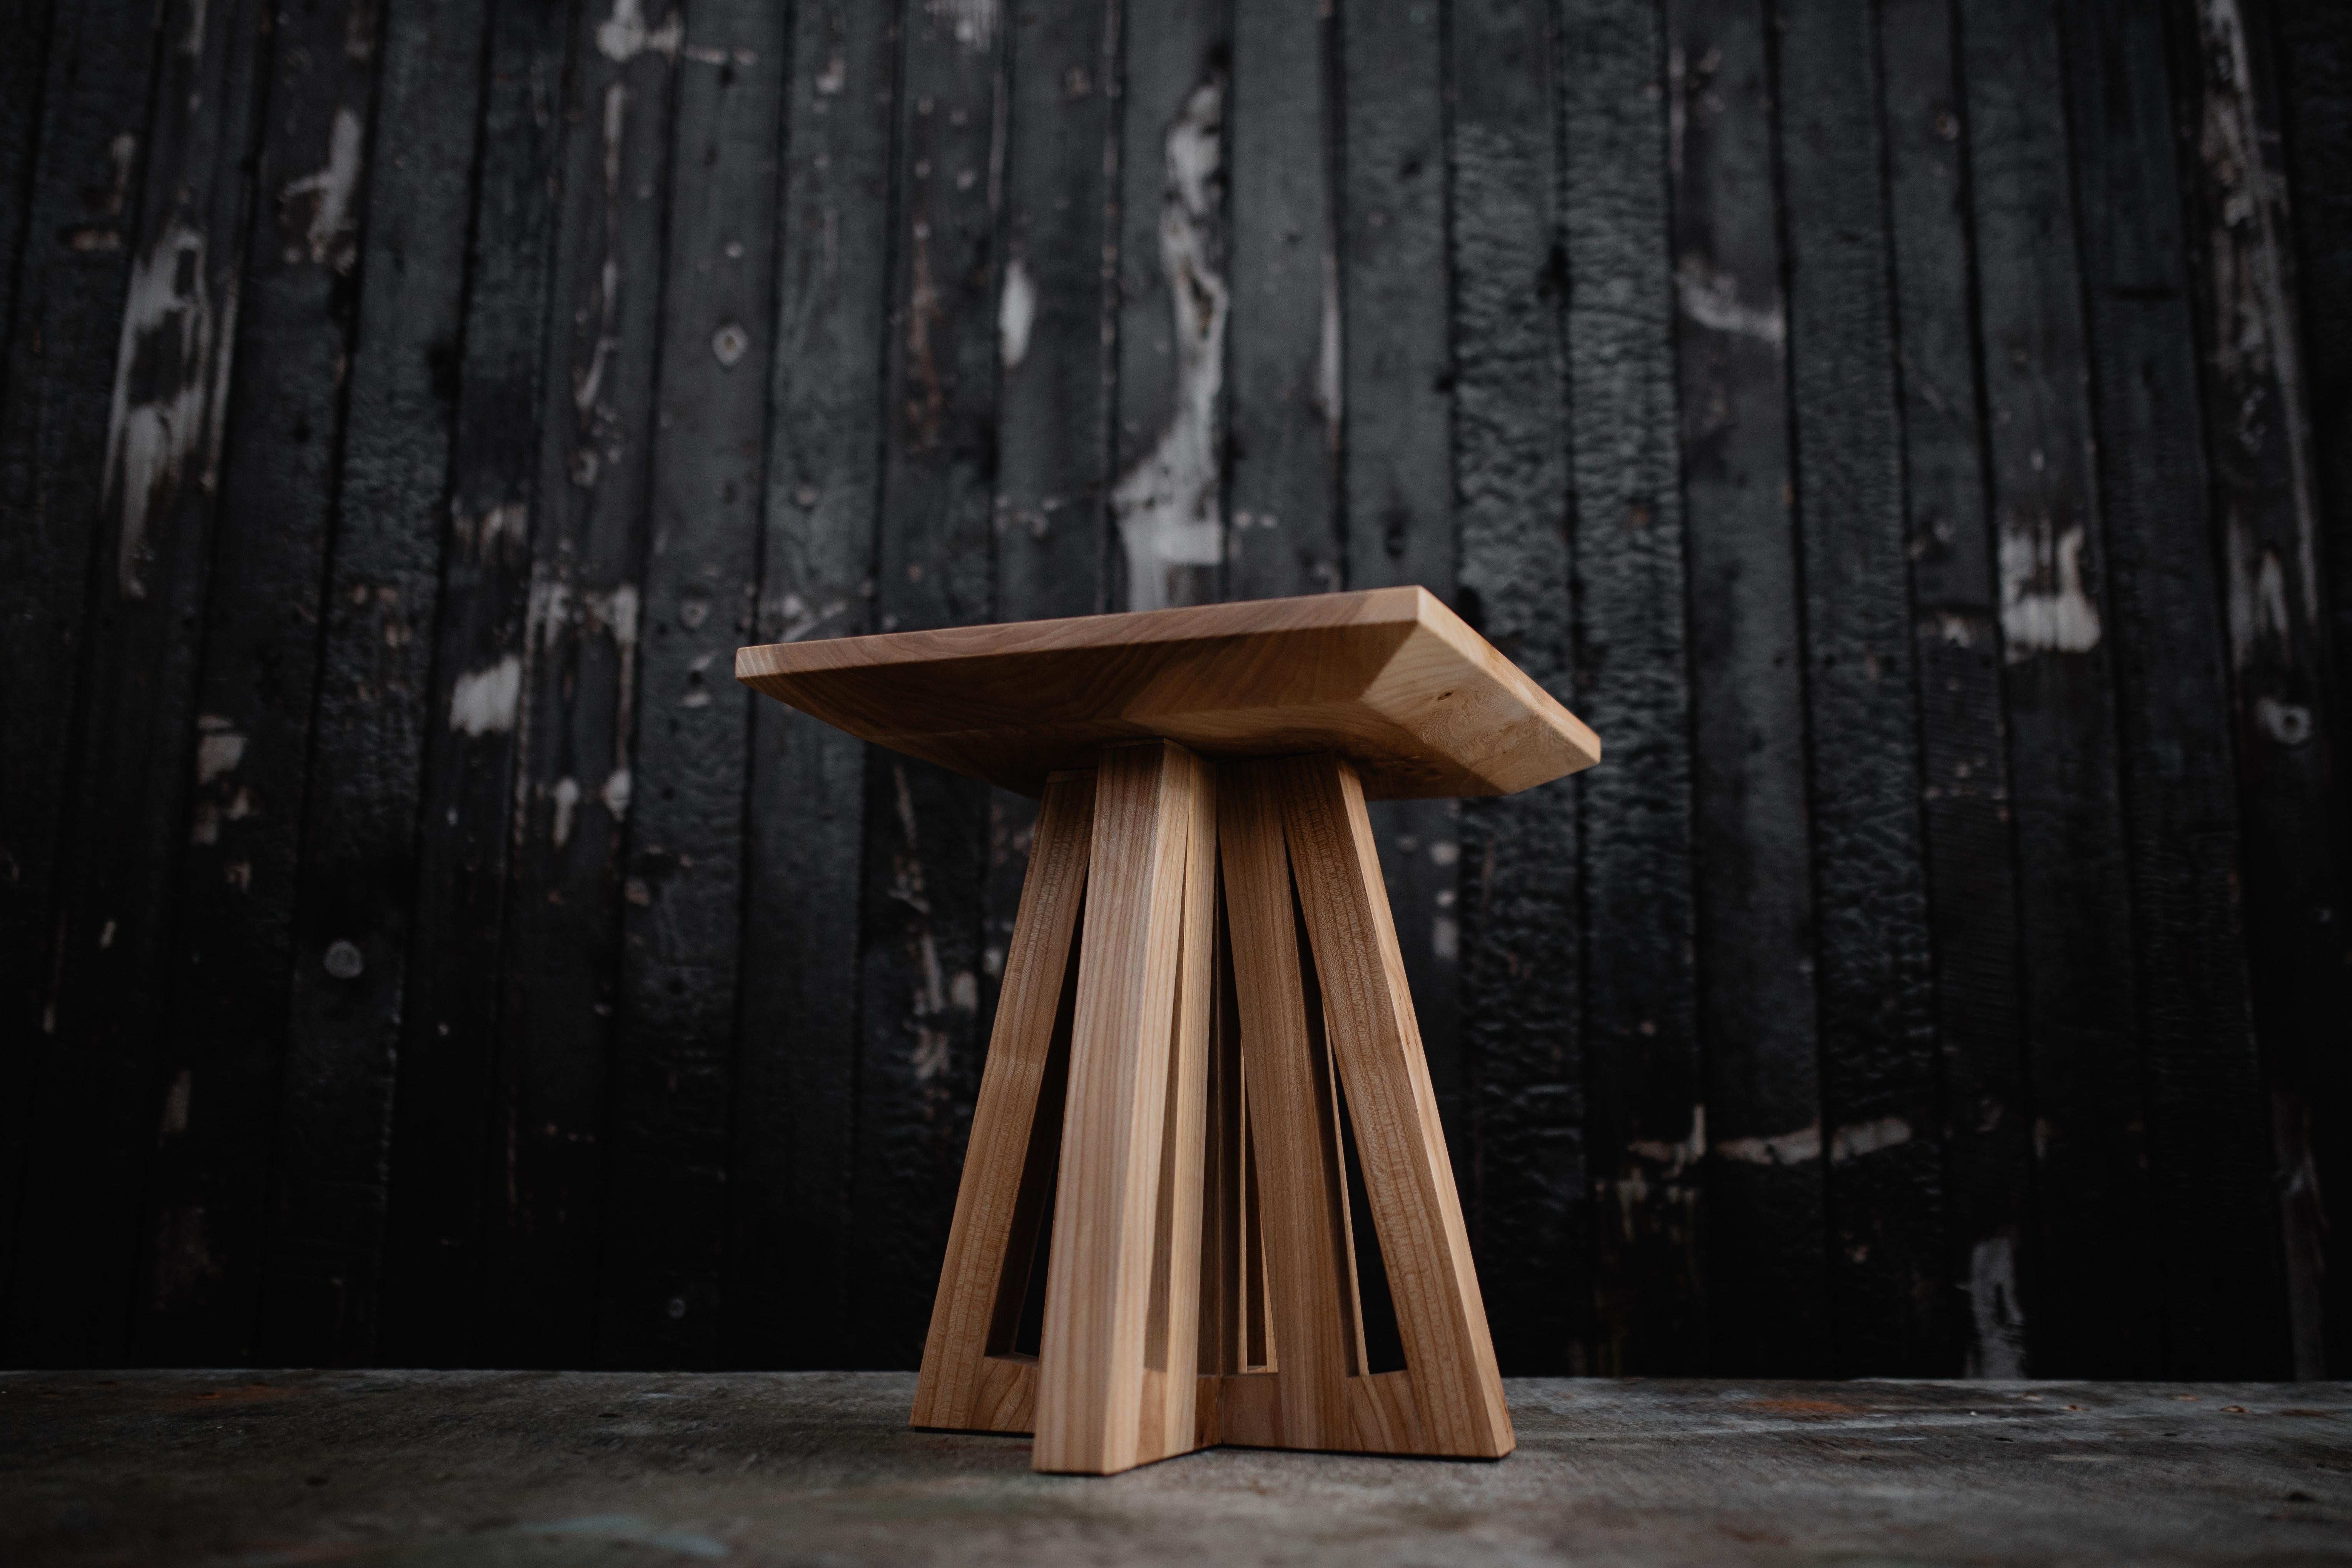 The Imani Side table carries the bold leg of the Imani Dining table and continues the sculptural look of the range.

The side table is made out of hard wood. The sculptural leg is the essence of the piece with a solid top displaying the beauty of